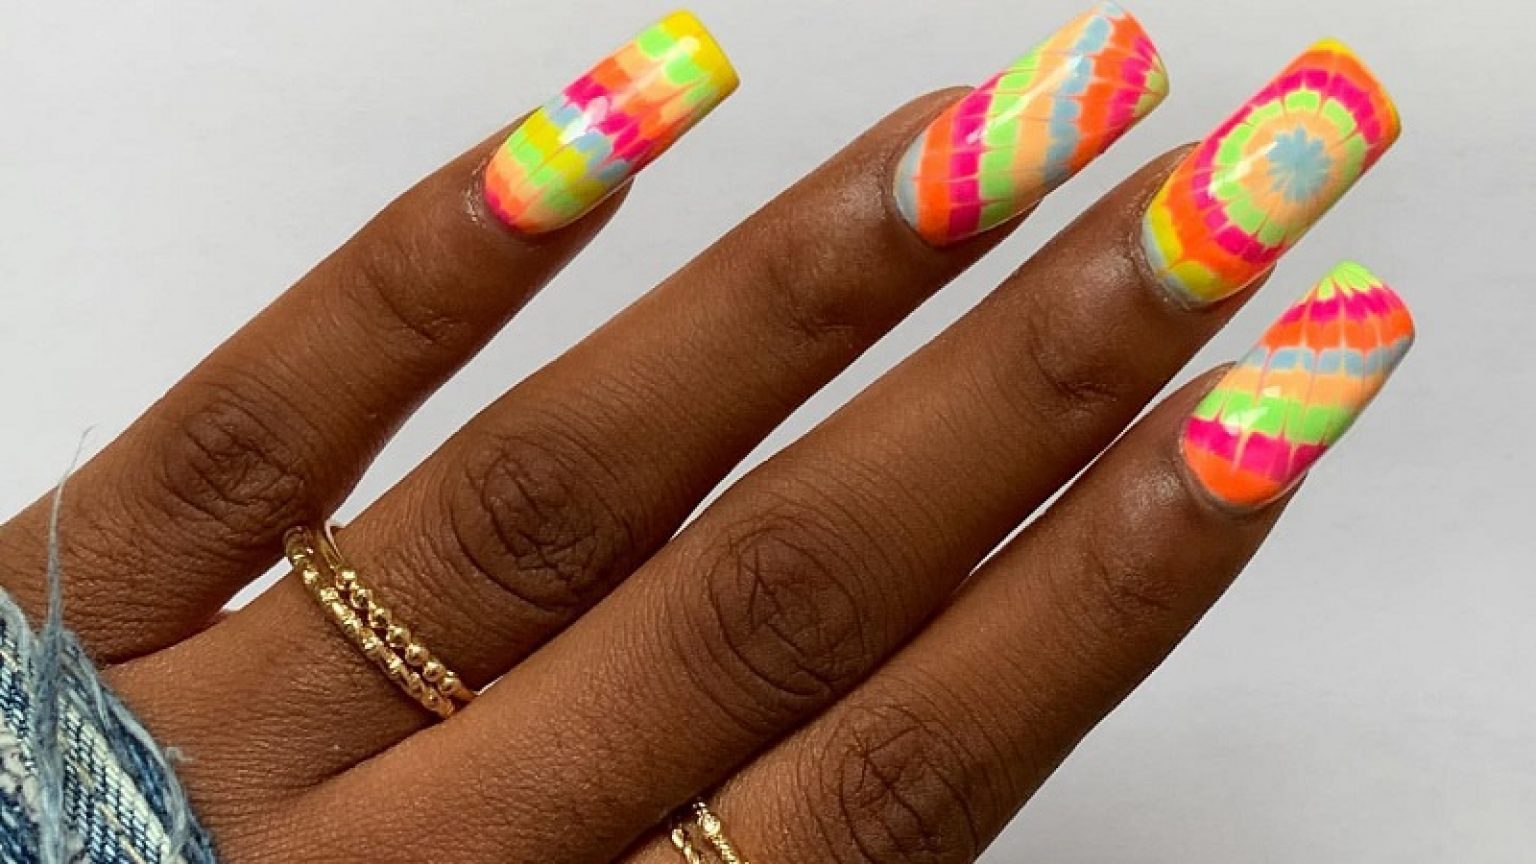 4. Tie-dye nail art from the 90s - wide 7